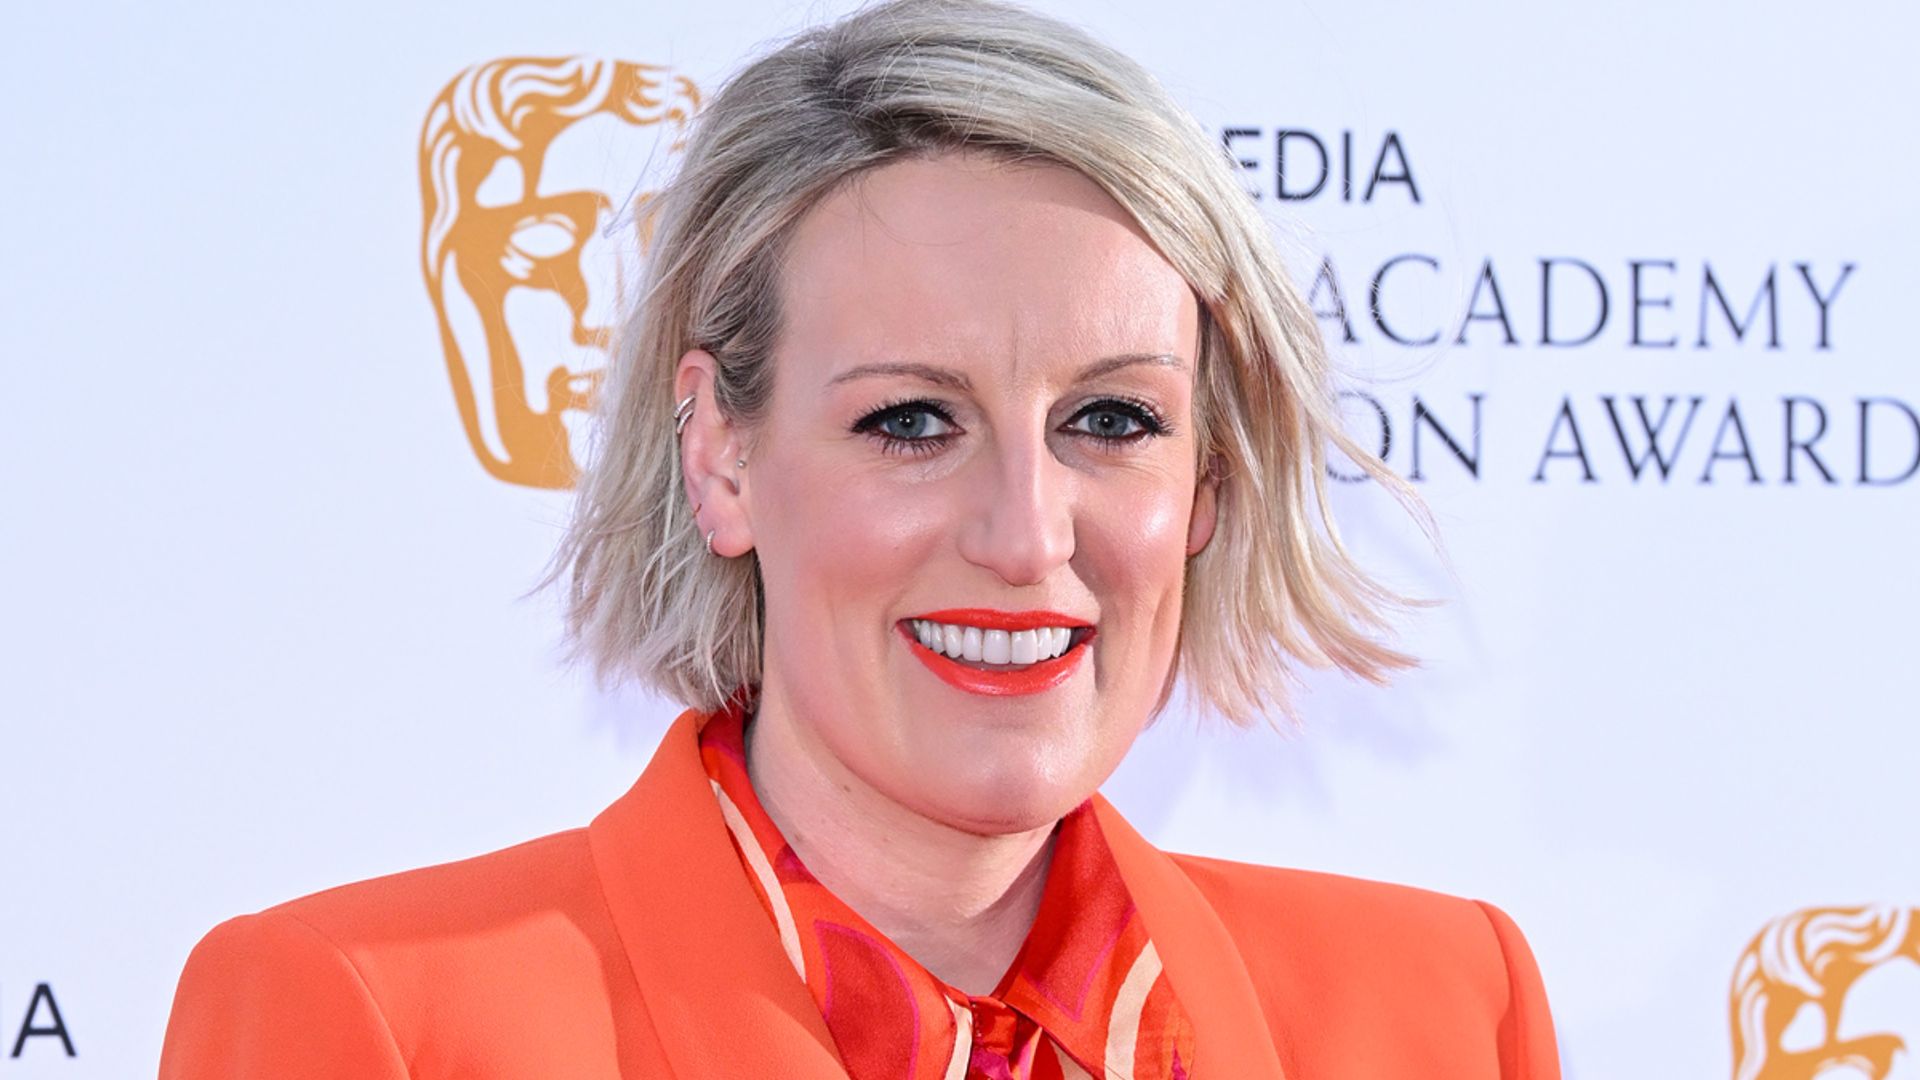 Steph McGovern from Steph's Packed Lunch wearing orange suit lipstick and shirt at BAFTAs